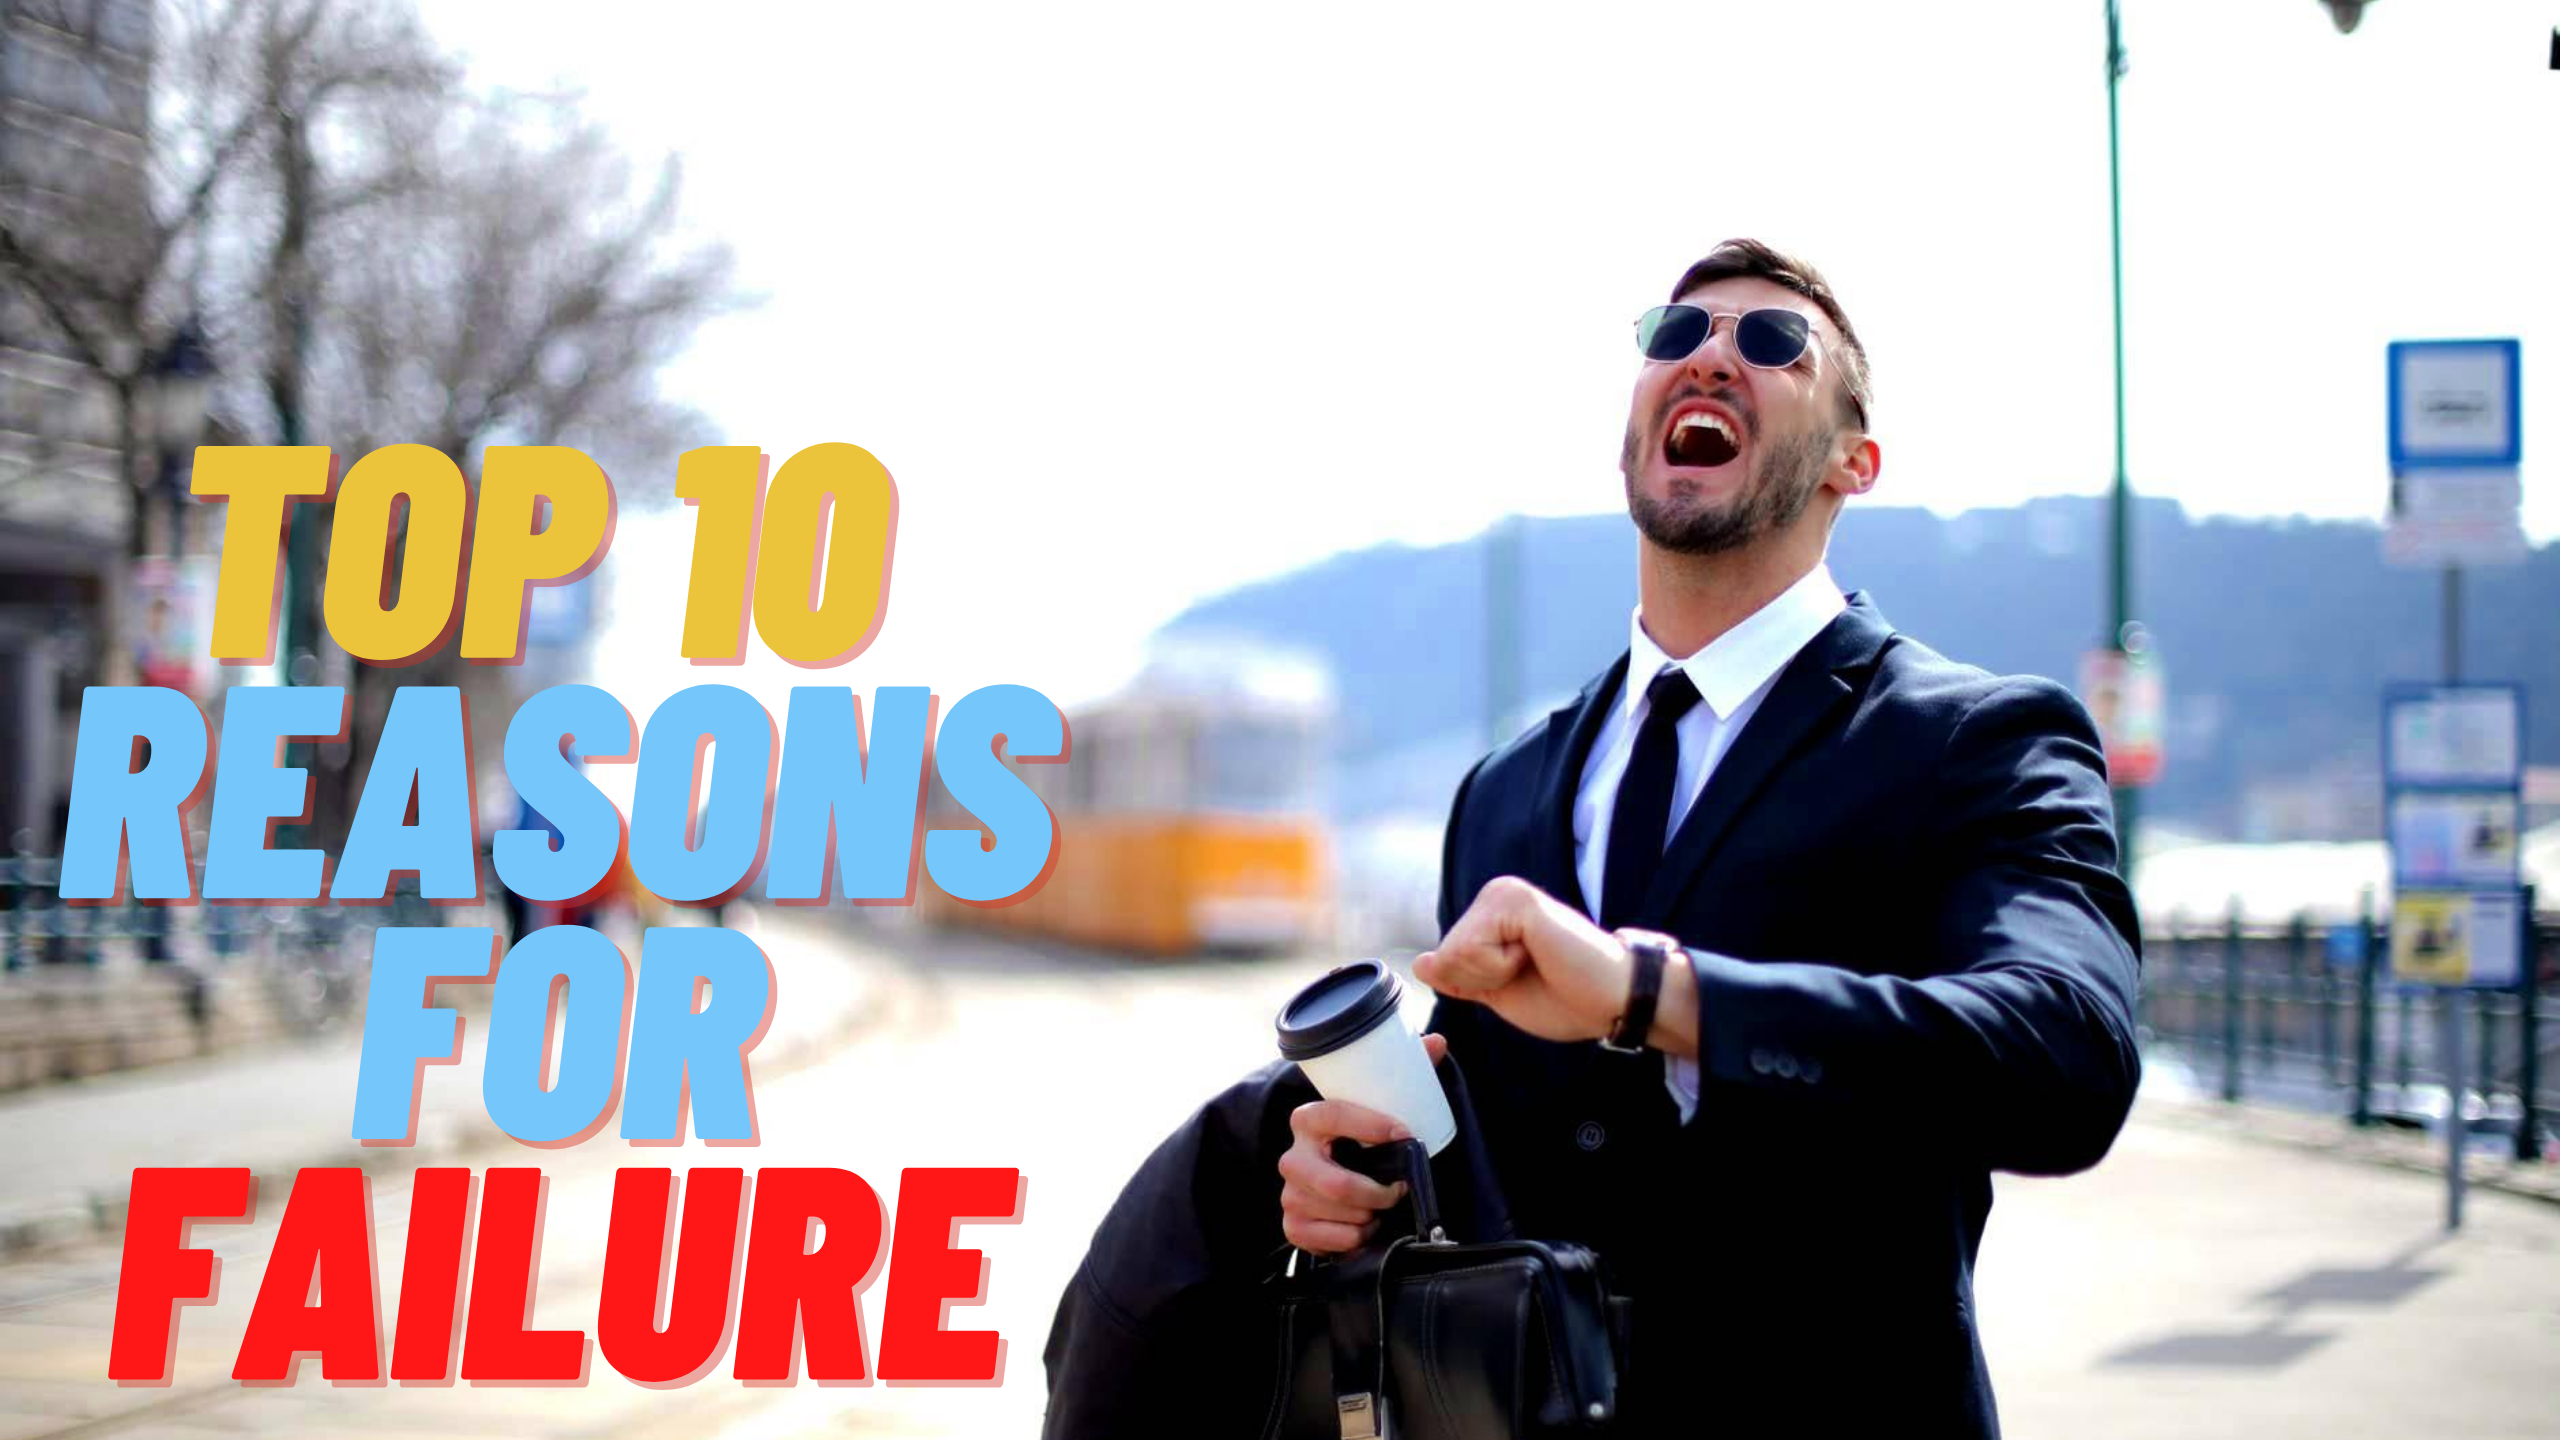 Top 10 Reasons for Failure